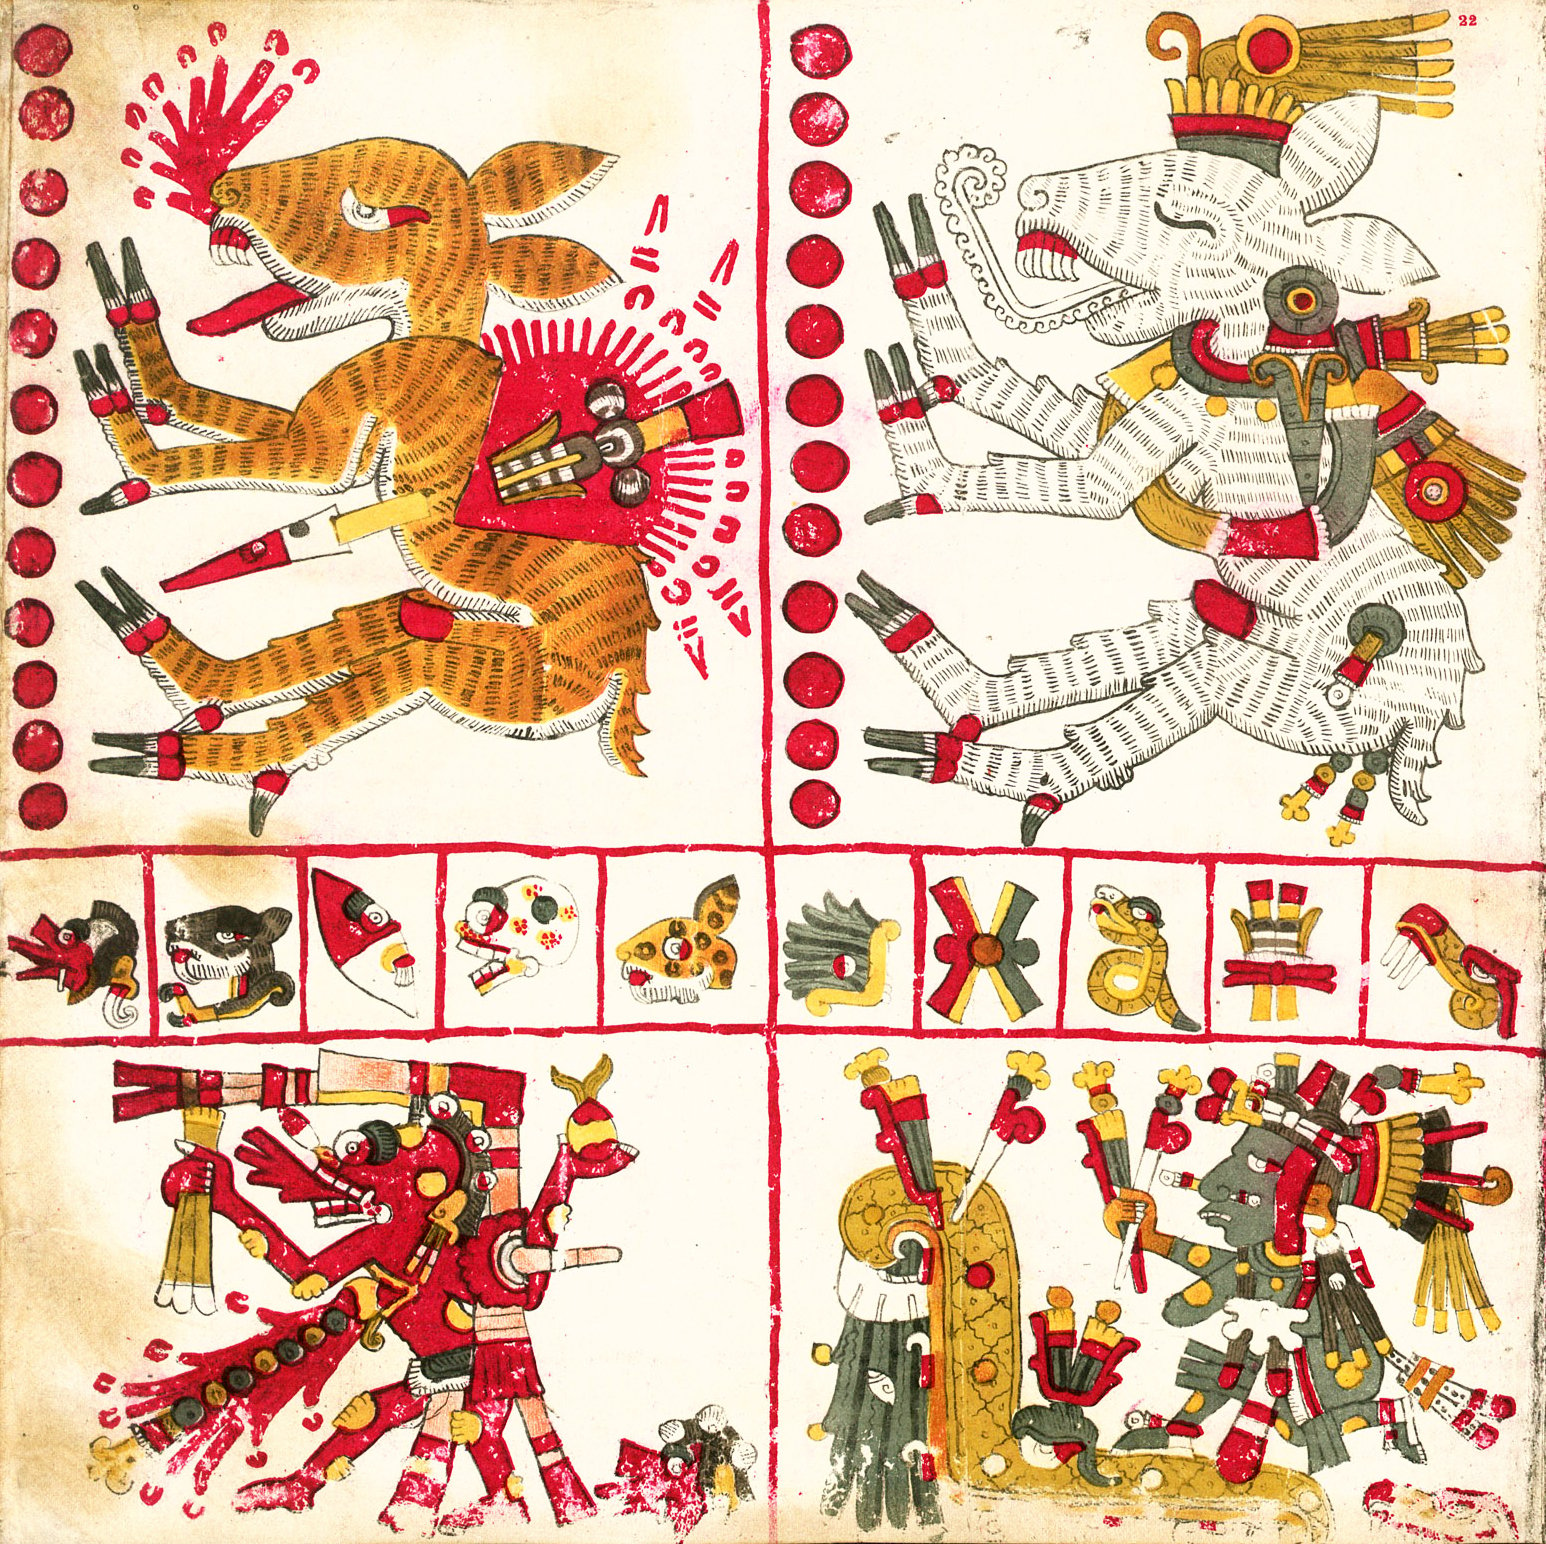 A detailed illustration from page 22 of the Codex Borgia showcasing the Naguals, mythical shapeshifting creatures. On the top left, a formidable figure appears in a mid-transformation state between a human and a fierce, reddish-brown feline creature with sharp claws and intense, fanged facial features. To its right is another figure, morphing between a human and a striped, white-gray canine or coyote-like creature, adorned with intricate jewelry and a crown. The center of the image is divided by a column of red circular symbols. Below these transformative figures, two human warriors or deities in vibrant costumes are depicted in dynamic poses, wielding weapons and surrounded by various smaller symbolic icons, including animals, plants, and abstract representations.